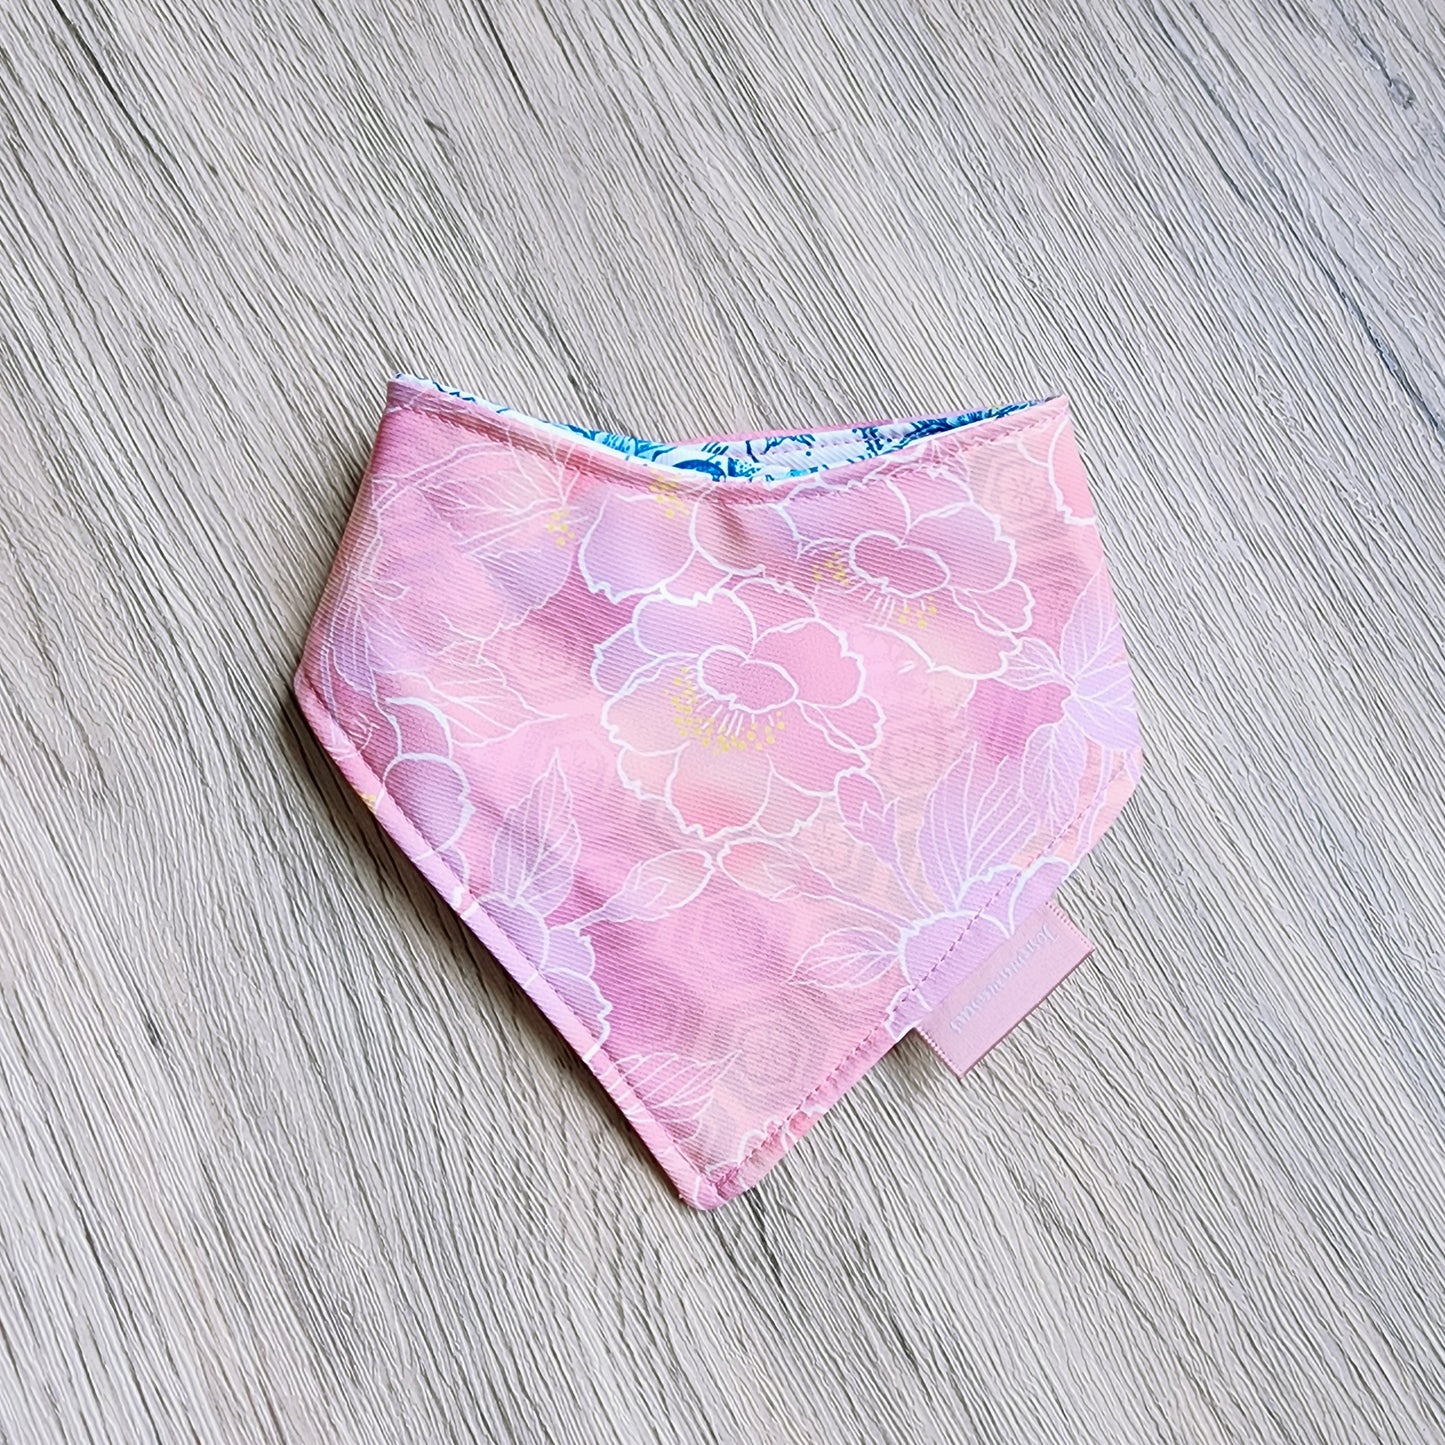 Peonies x Lily Size S Reversible Bandana (curved)